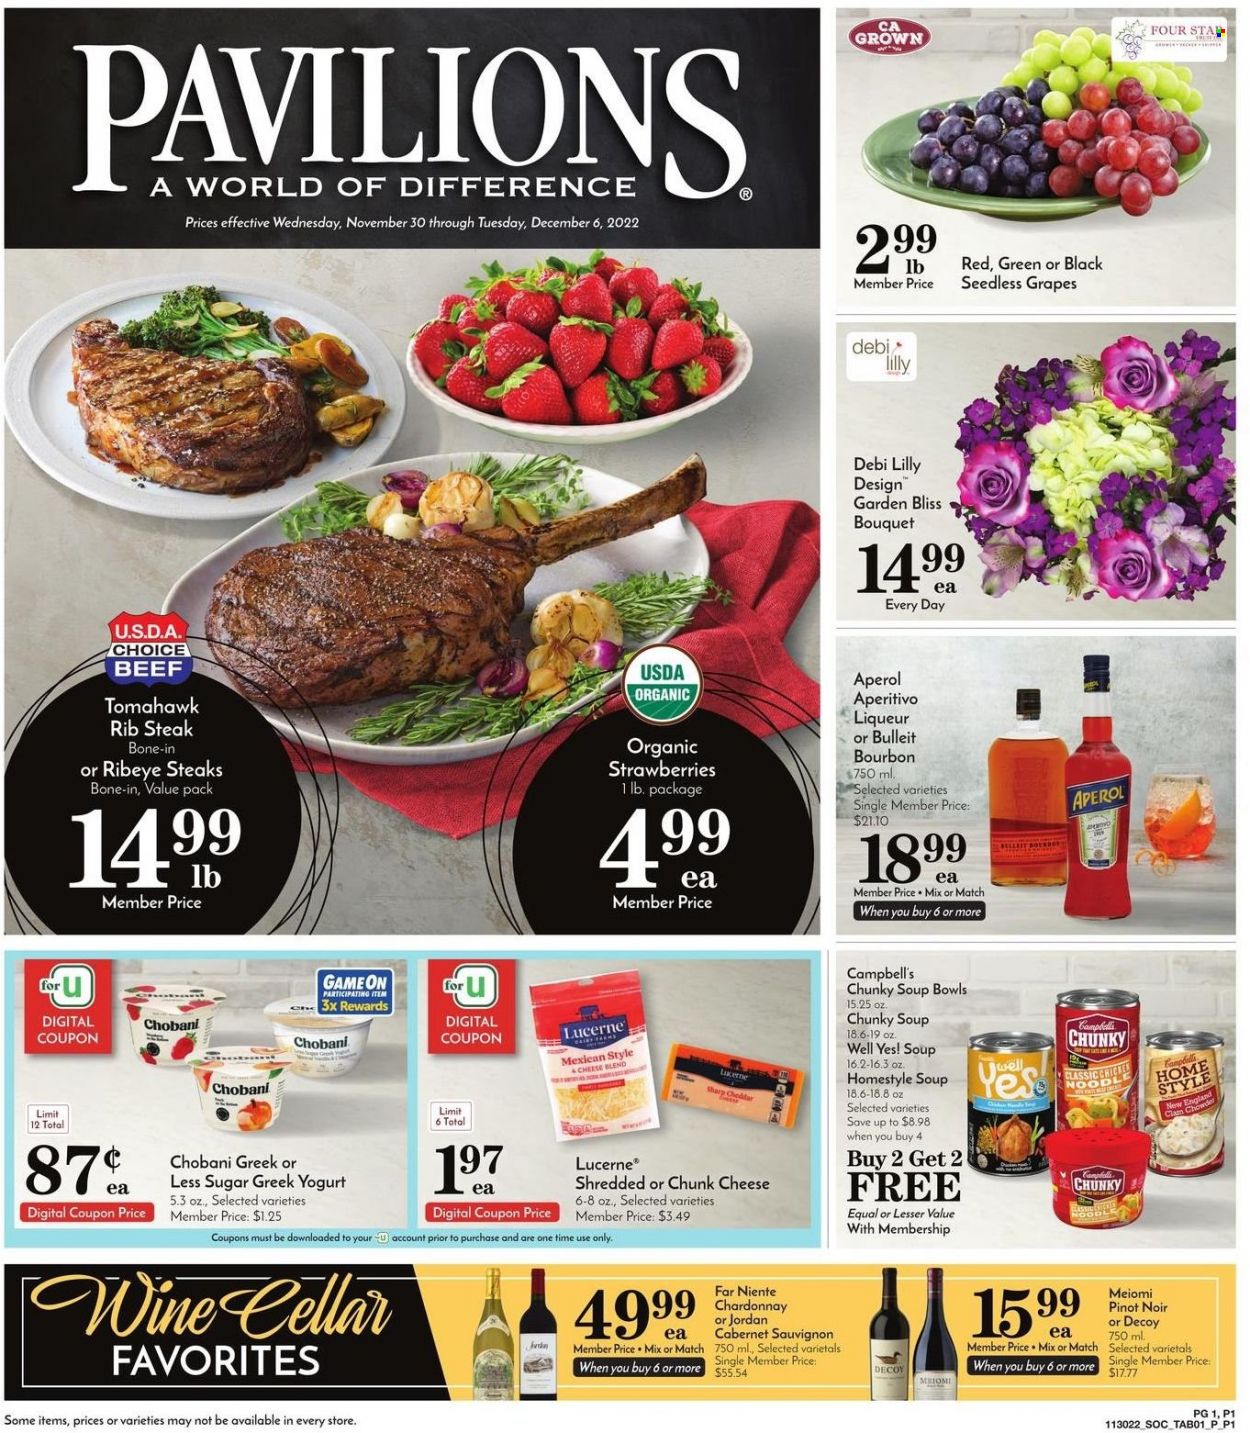 thumbnail - Pavilions Flyer - 11/30/2022 - 12/06/2022 - Sales products - grapes, seedless grapes, clams, Campbell's, soup, noodles, cheddar, cheese, chunk cheese, yoghurt, Chobani, Cabernet Sauvignon, red wine, white wine, Chardonnay, wine, Pinot Noir, bourbon, liqueur, Aperol, beef meat, steak, ribeye steak, tomahawk steak, bouquet. Page 1.